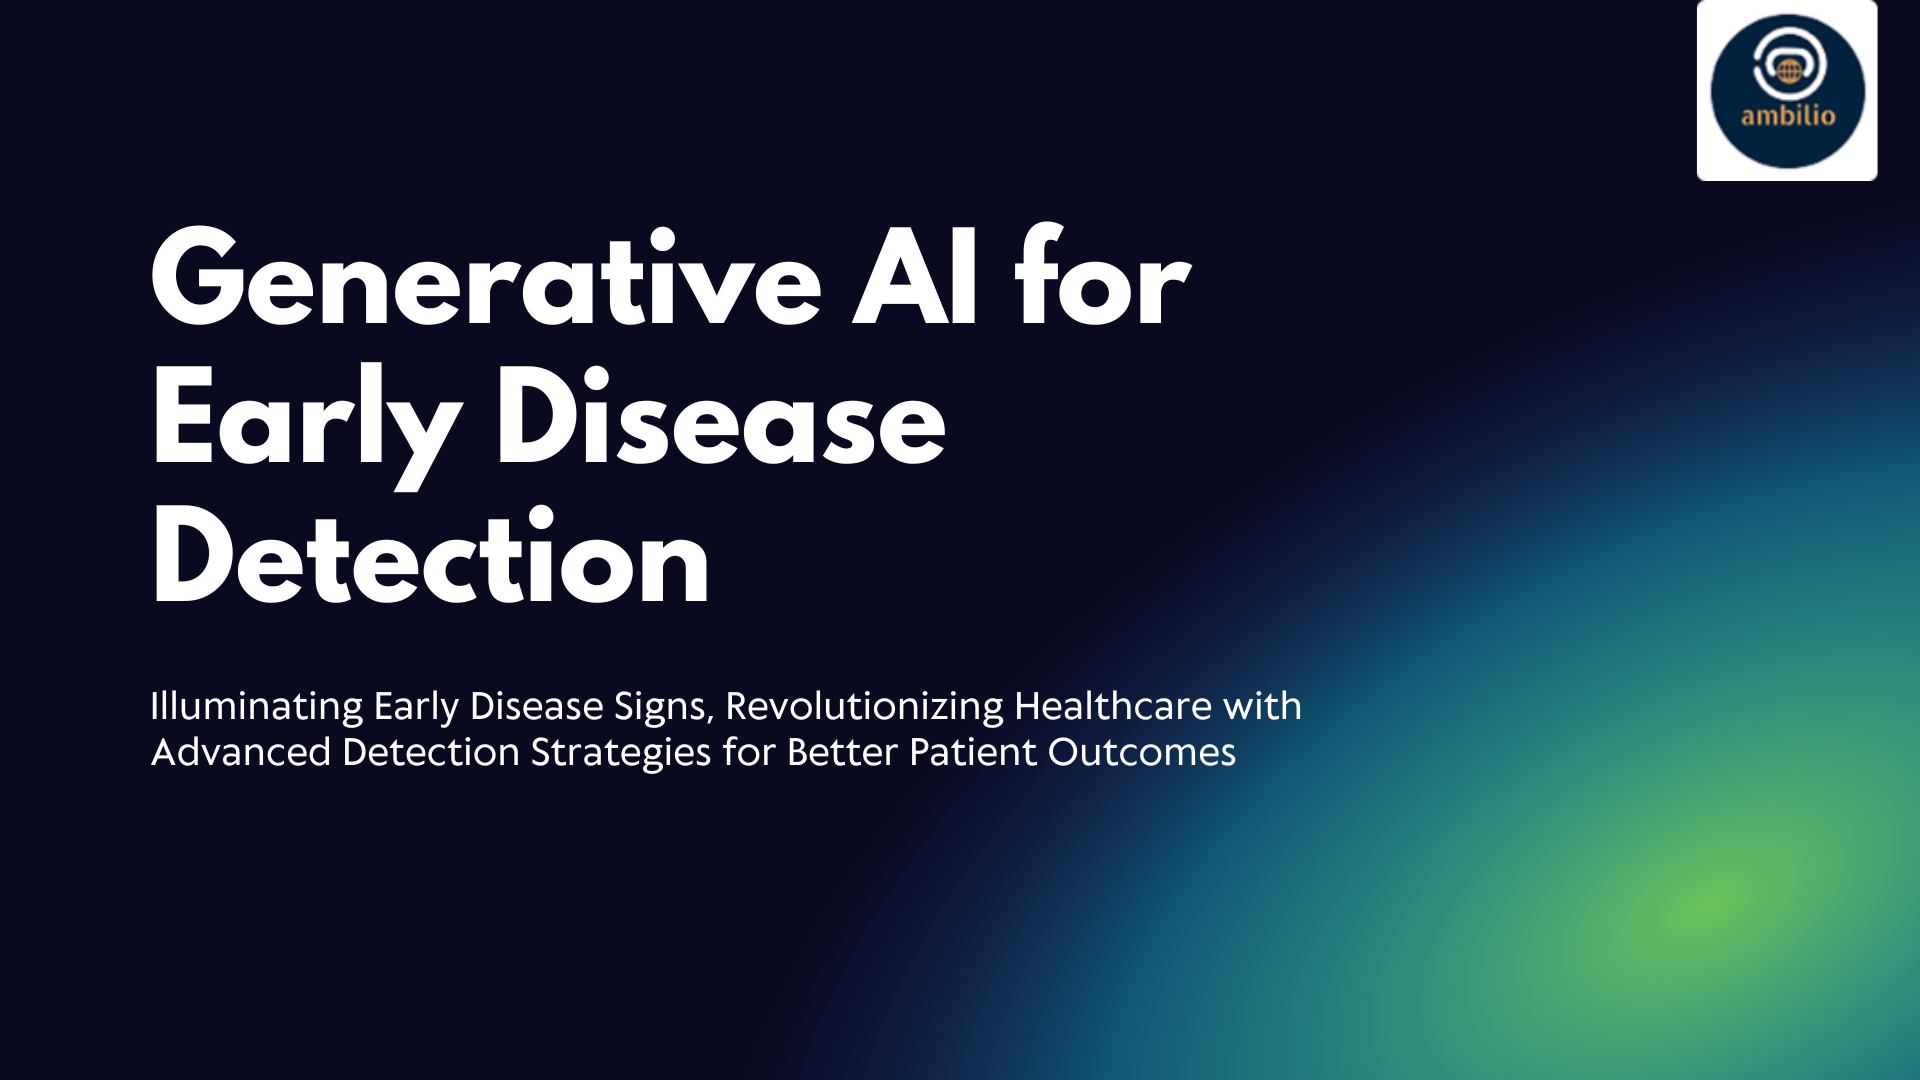 How Does Generative AI Contribute to Early Disease Detection?